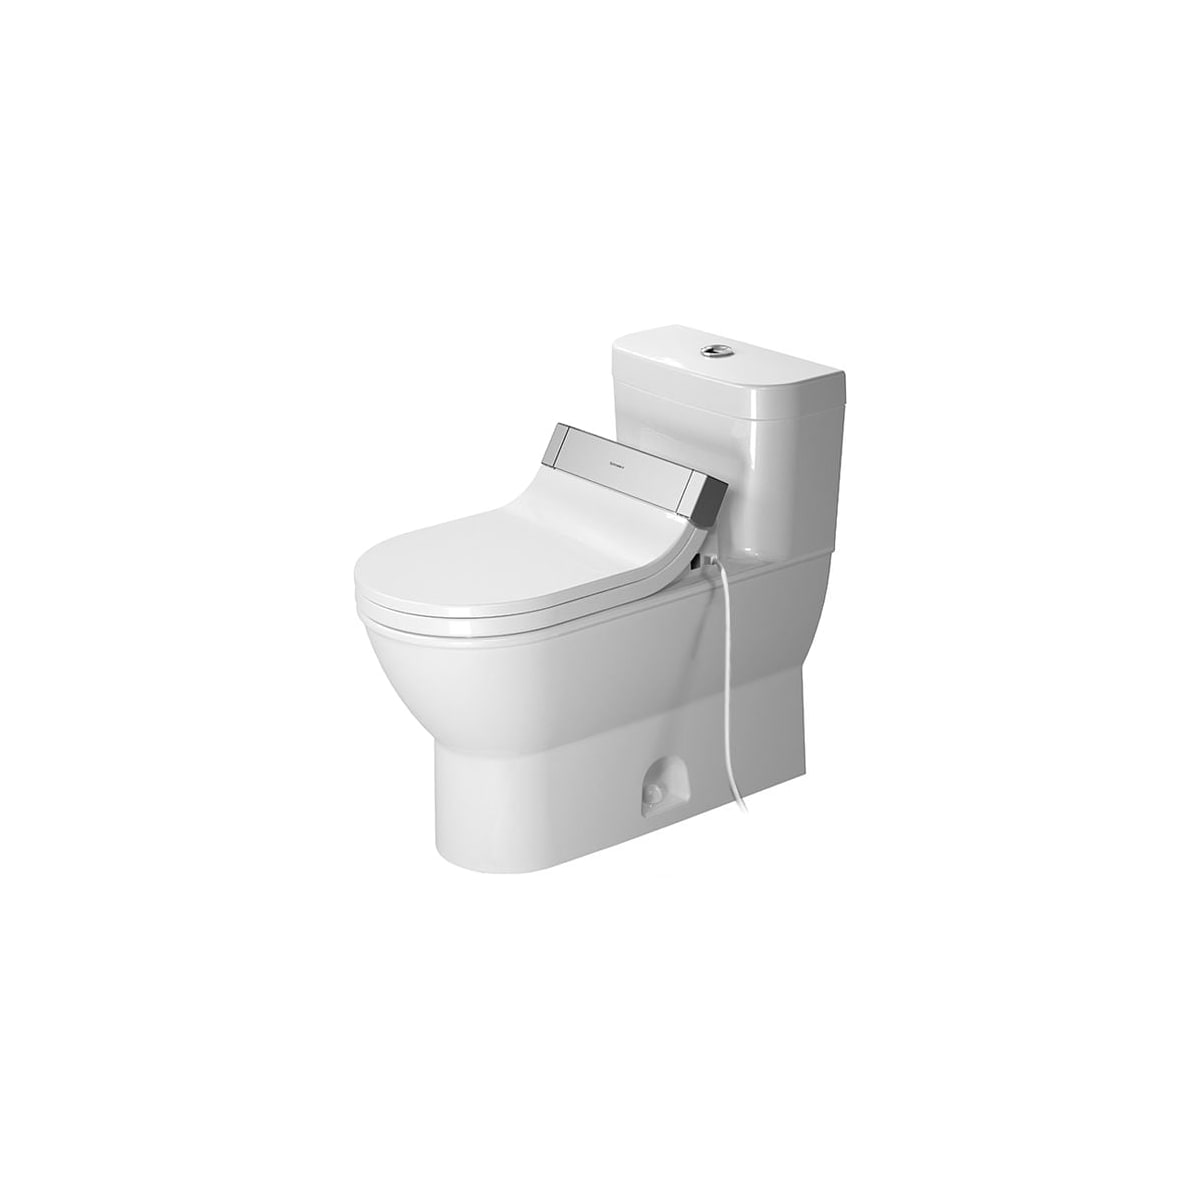 Duravit D2102000 Darling New 1.28 GPF One Elongated Toilet with Push Button Flush - Bidet Seat Included - FaucetDirect.com